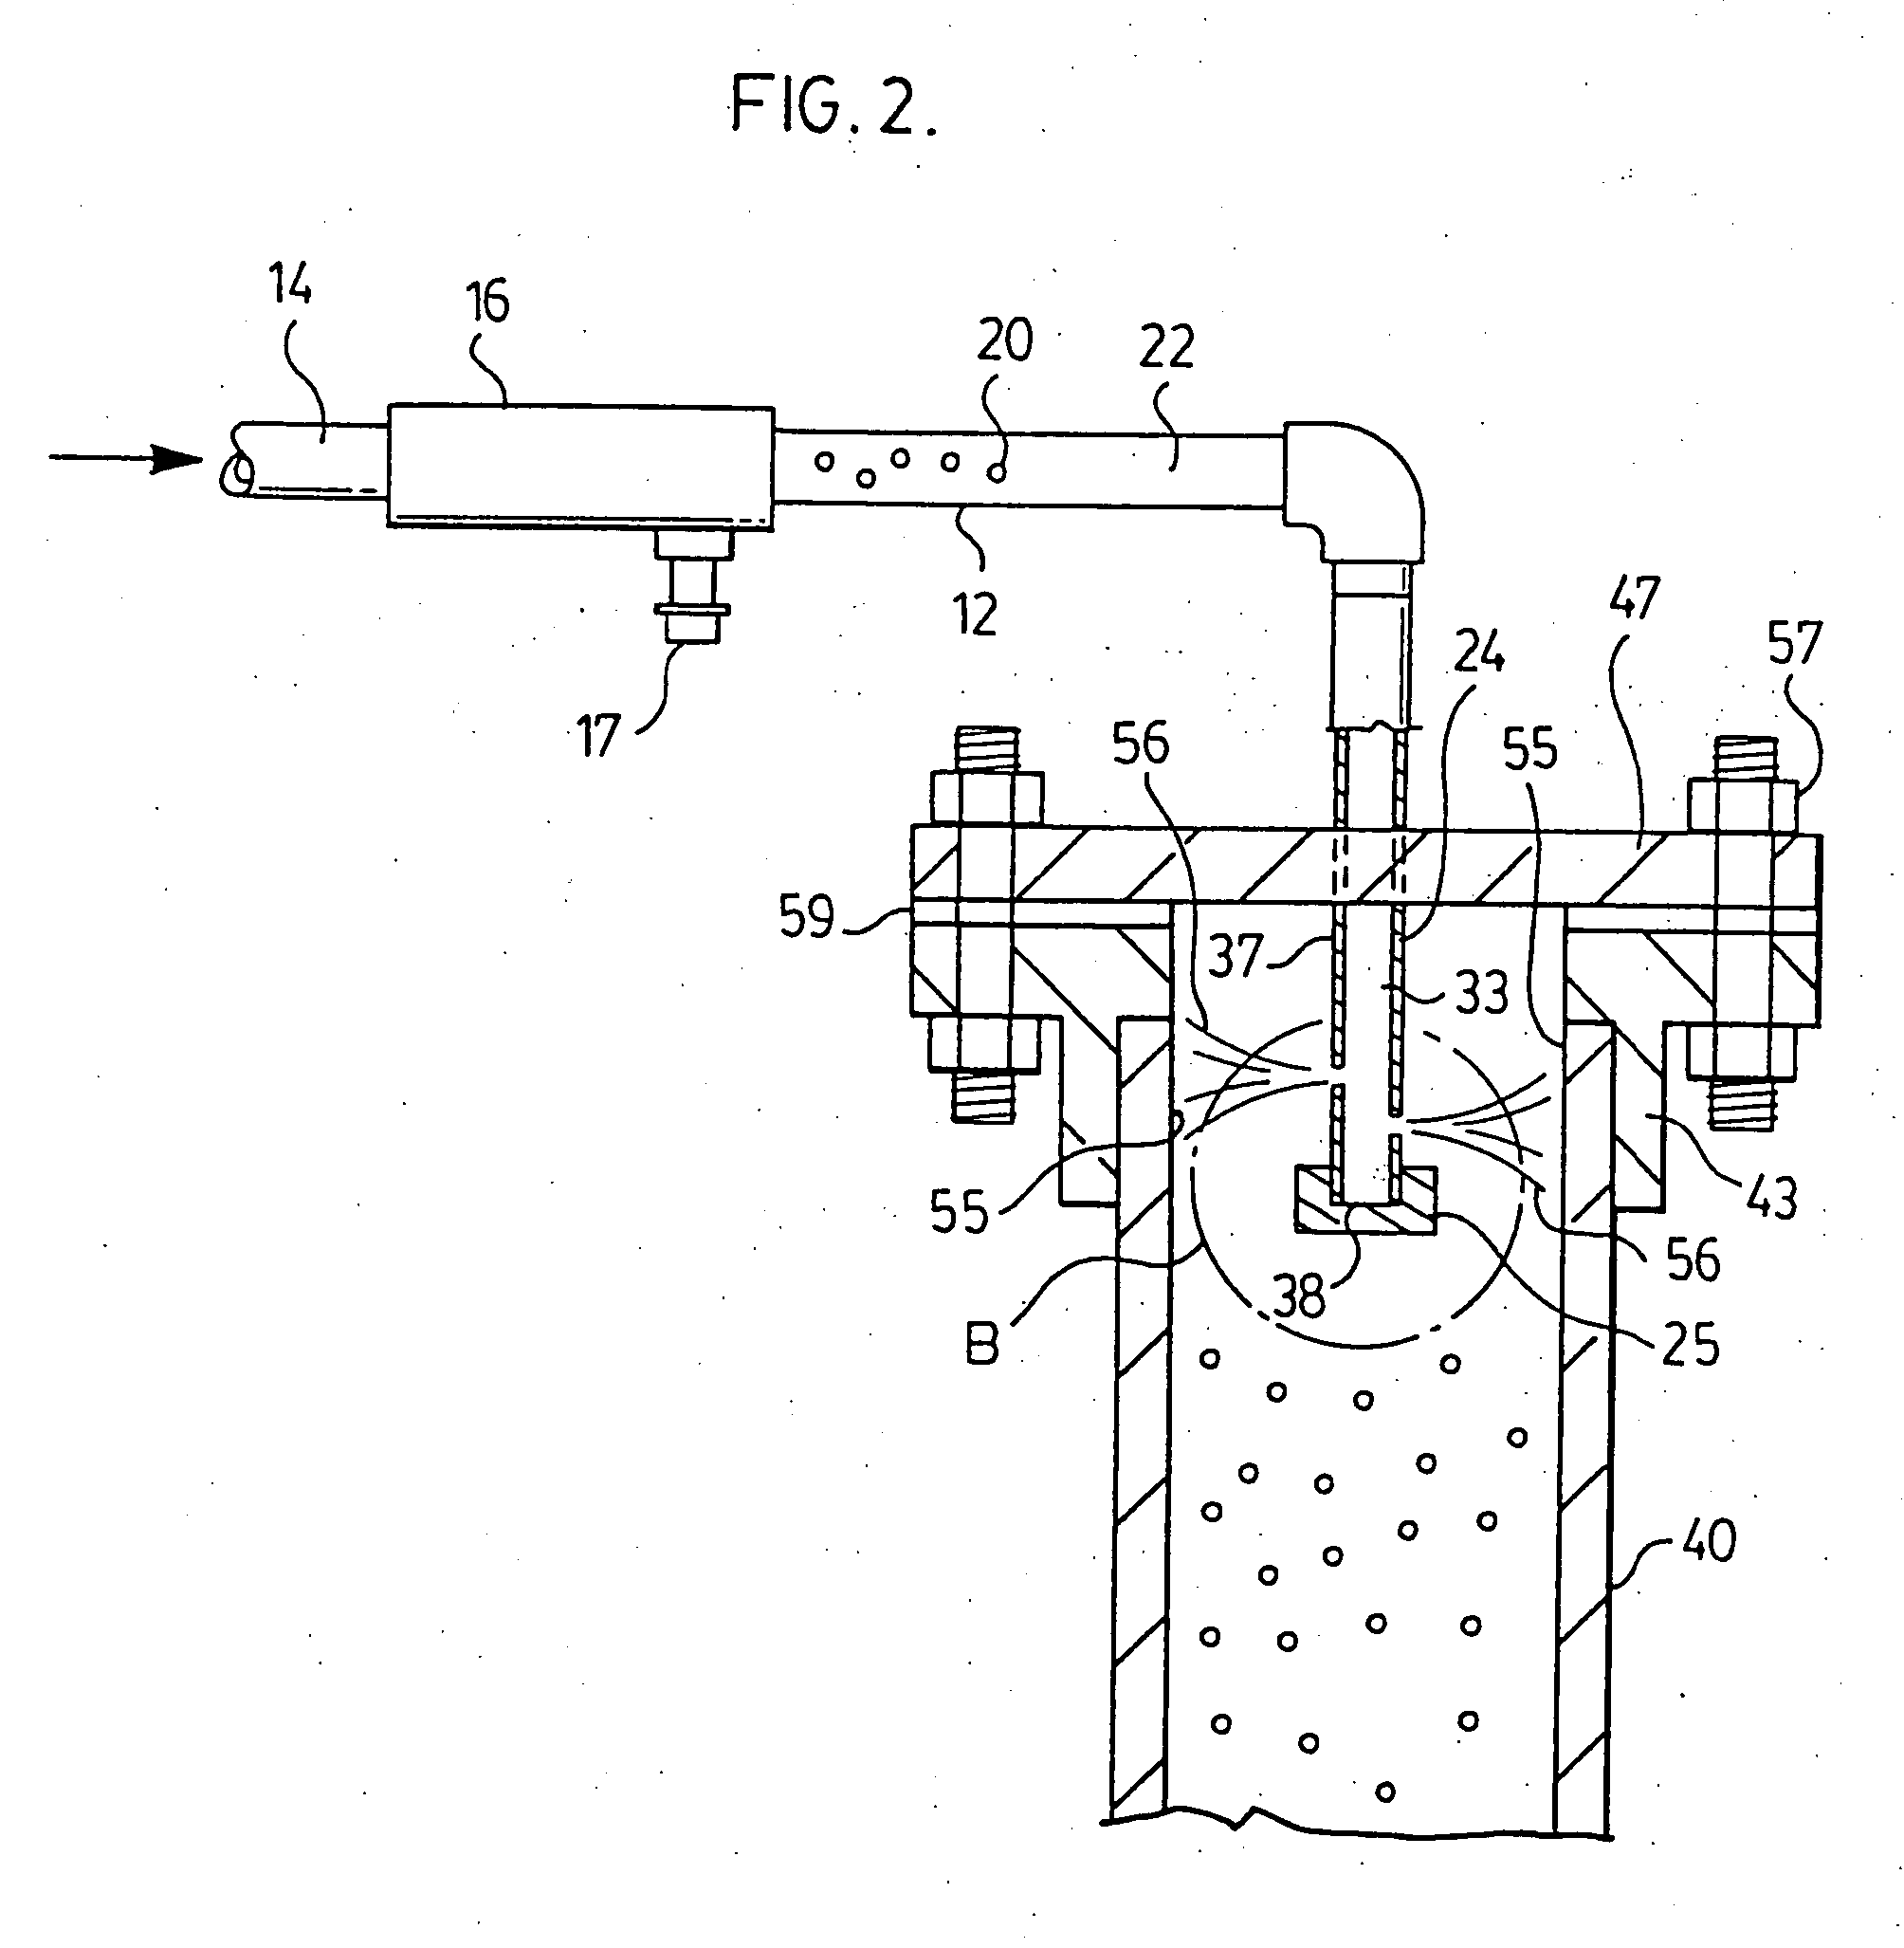 Apparatus and method for producing small gas bubbles in liquids